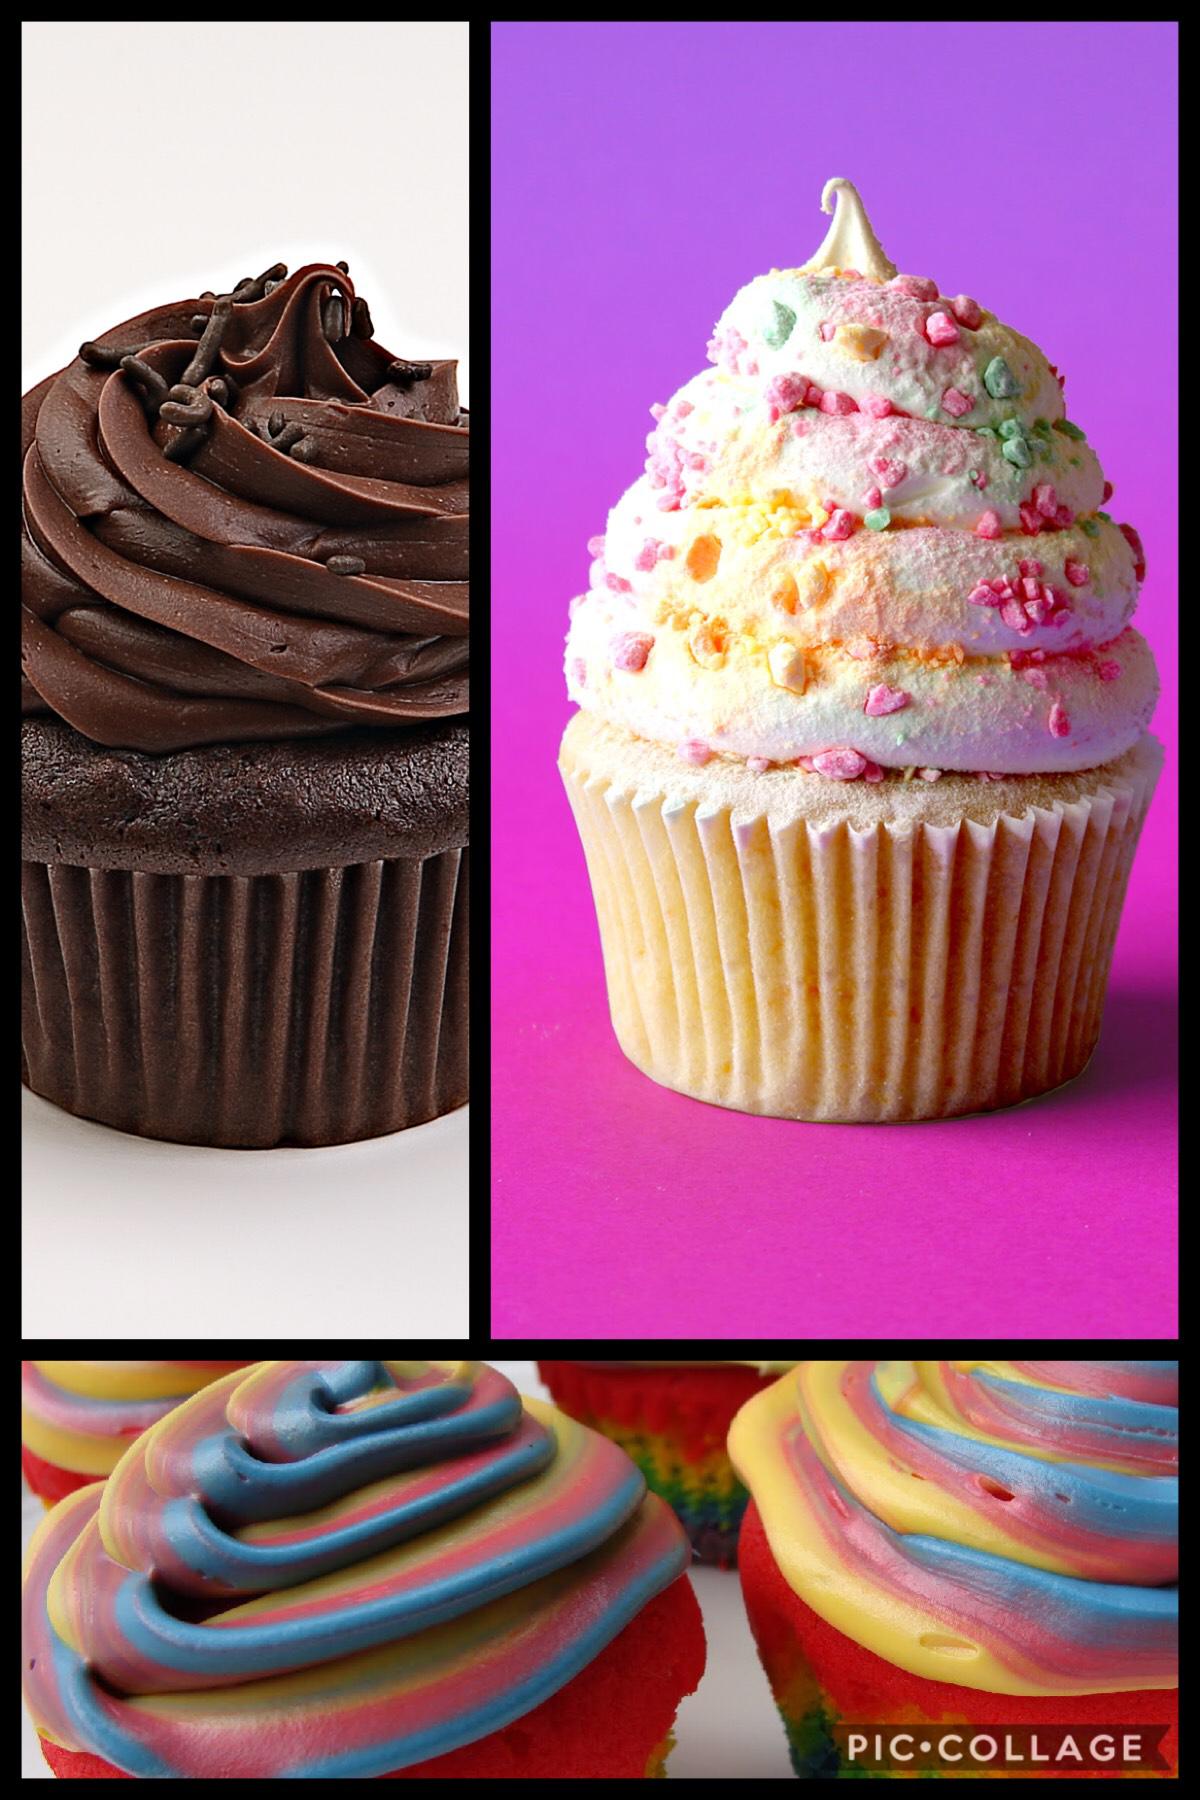 What’s your fav flavour of cake or cupcake mines chocolate or strawberry 